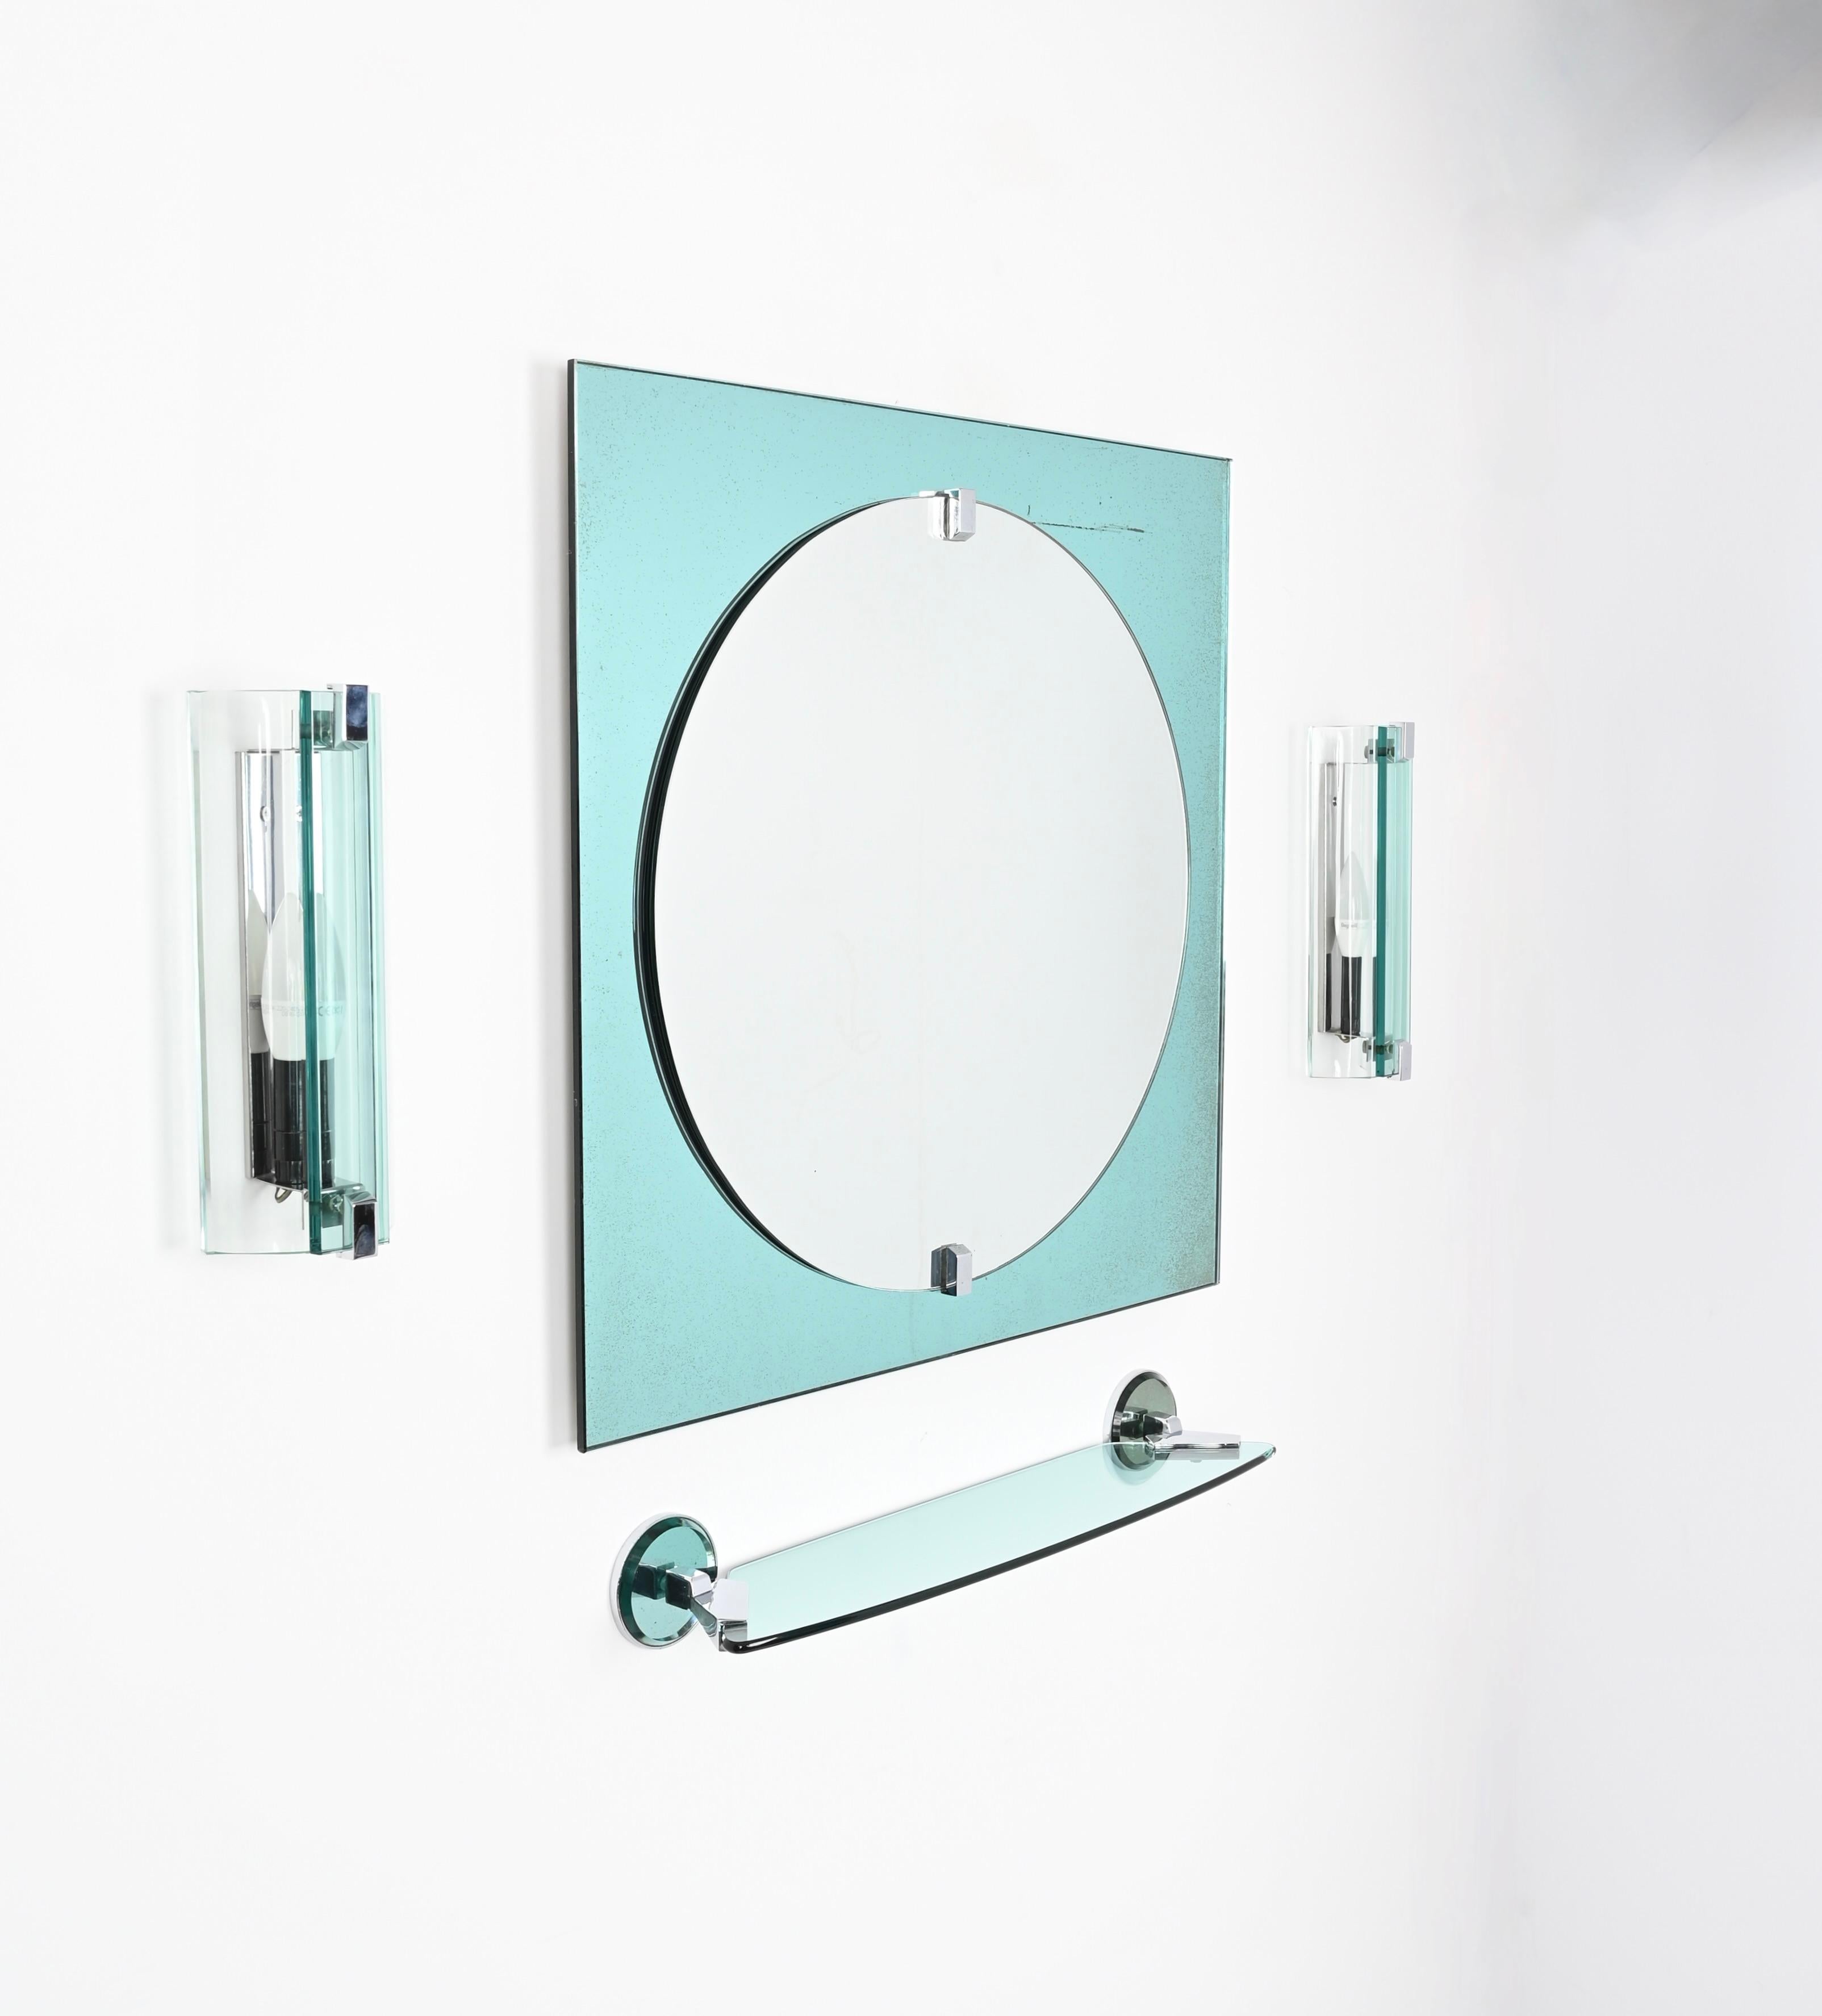 Magnificent Italian bathroom set in a lovely blue tiffany colored artglass and chromed steel that includes a sqaure mirror, two sconces and a wall shelf. These fantastic items were made by VECA in Italy during the 1970s and are signed on the back of